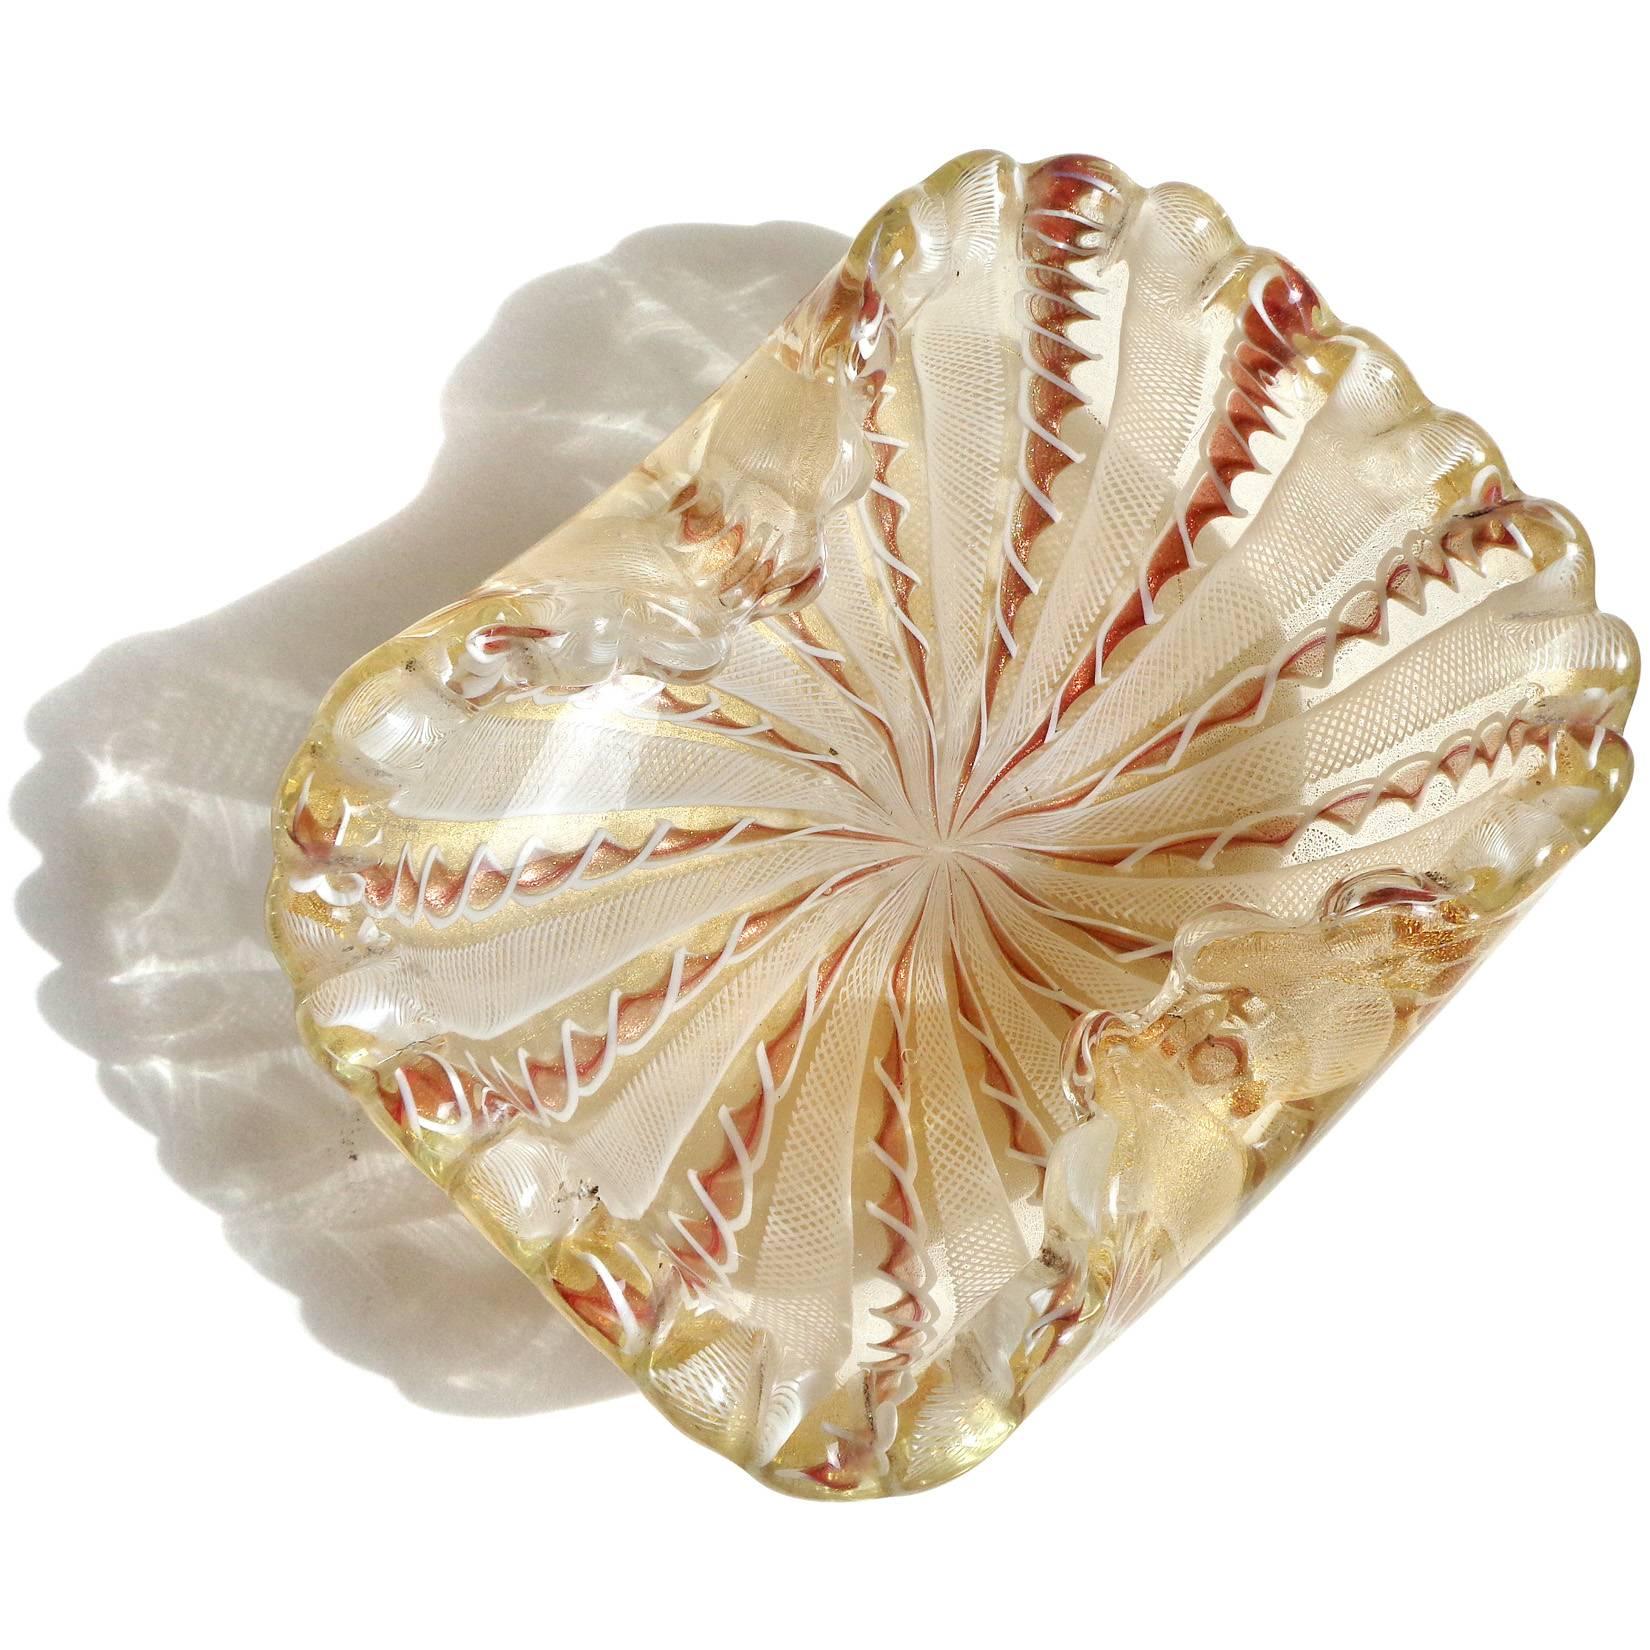 Beautiful Murano handblown copper aventurine ribbons, white netting and gold flecks art glass decorative bowl. Documented to the Fratelli Toso company. The piece has a scalloped rim, Zanfirico and twisted Latticino ribbons. Profusely covered in gold